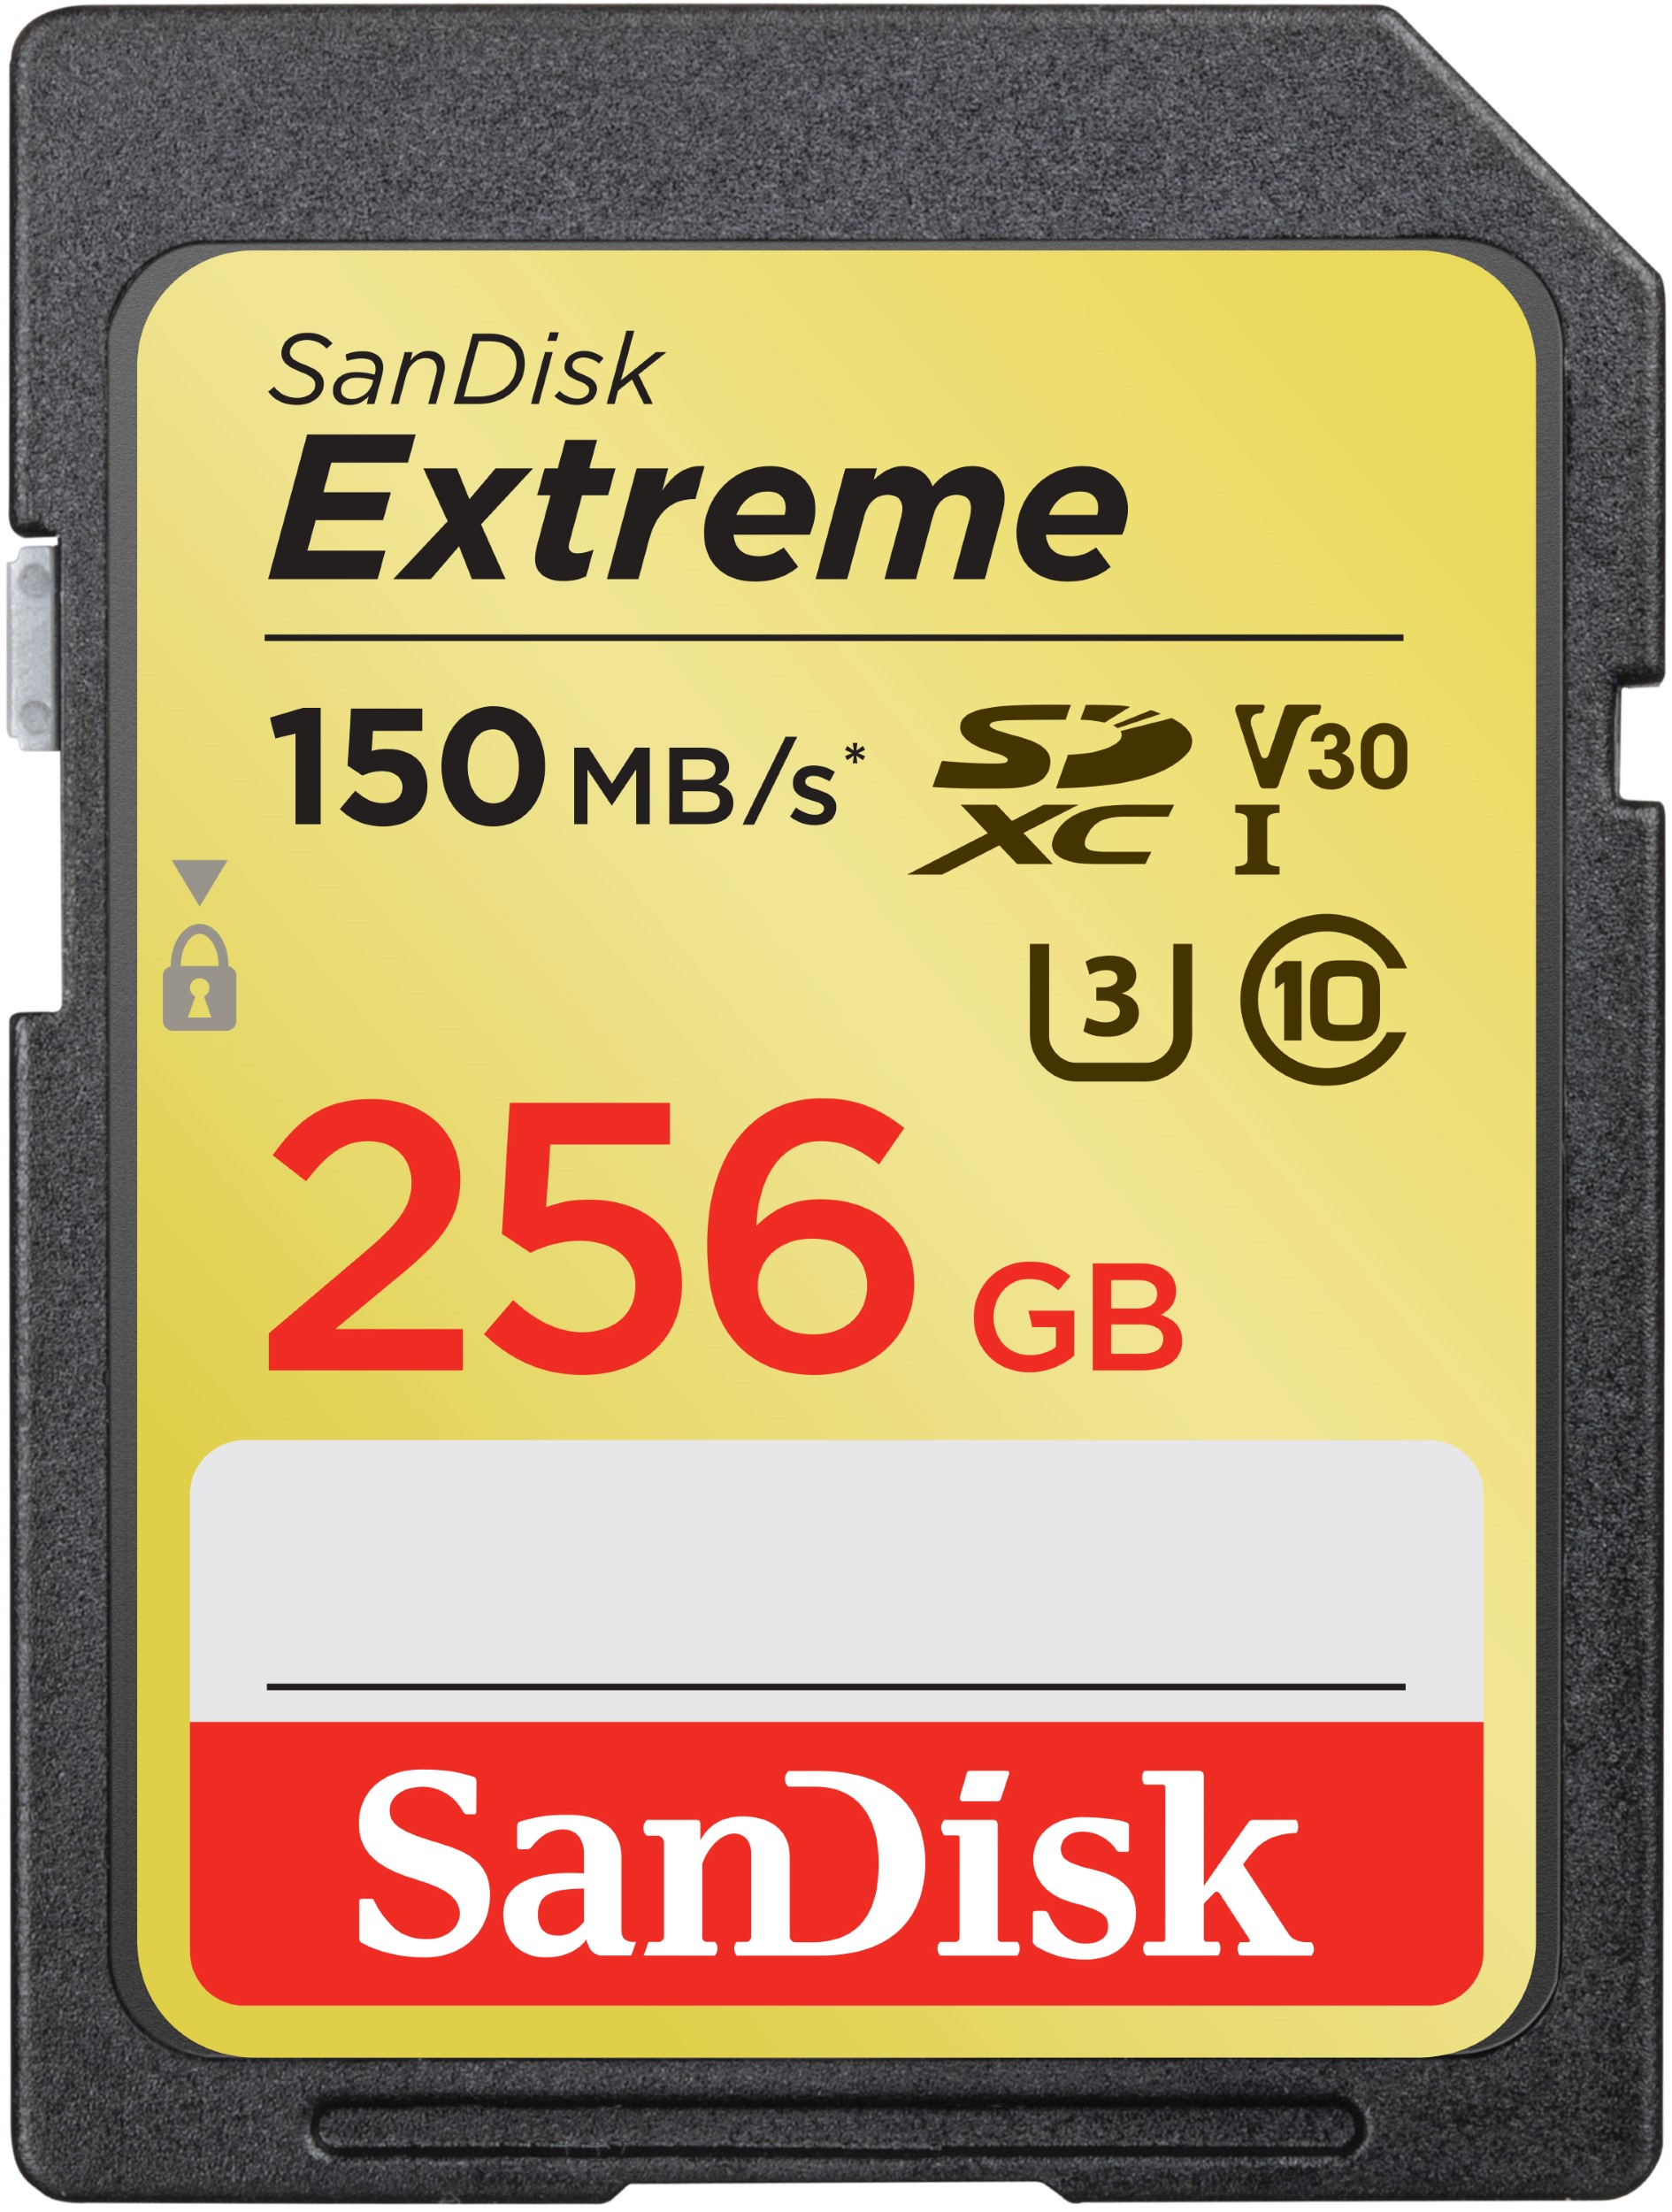 Picture of SanDisk Extreme SDXC UHSI Card 256GB